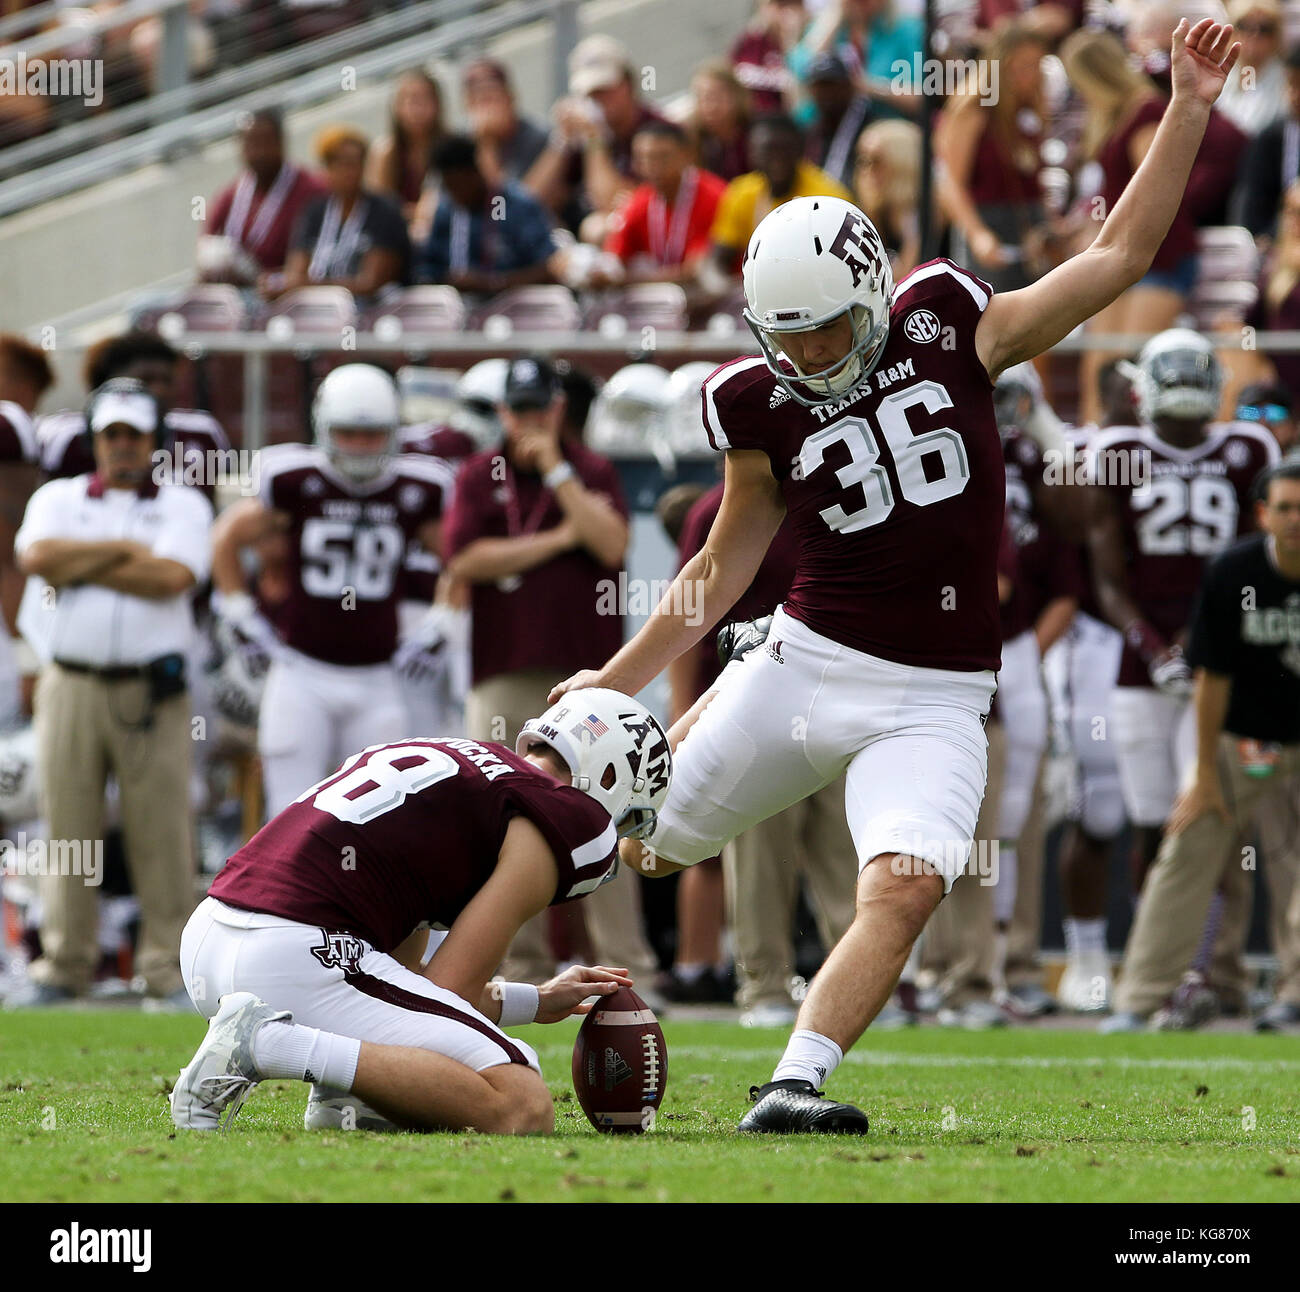 November 4, 2017: Texas A&M Aggies place kicker Daniel LaCamera (36) kicks a 39 yard field goal in the first quarter during the NCAA football game between the Auburn Tigers and the Texas A&M Aggies at Kyle Field in College Station, TX; John Glaser/CSM. Stock Photo